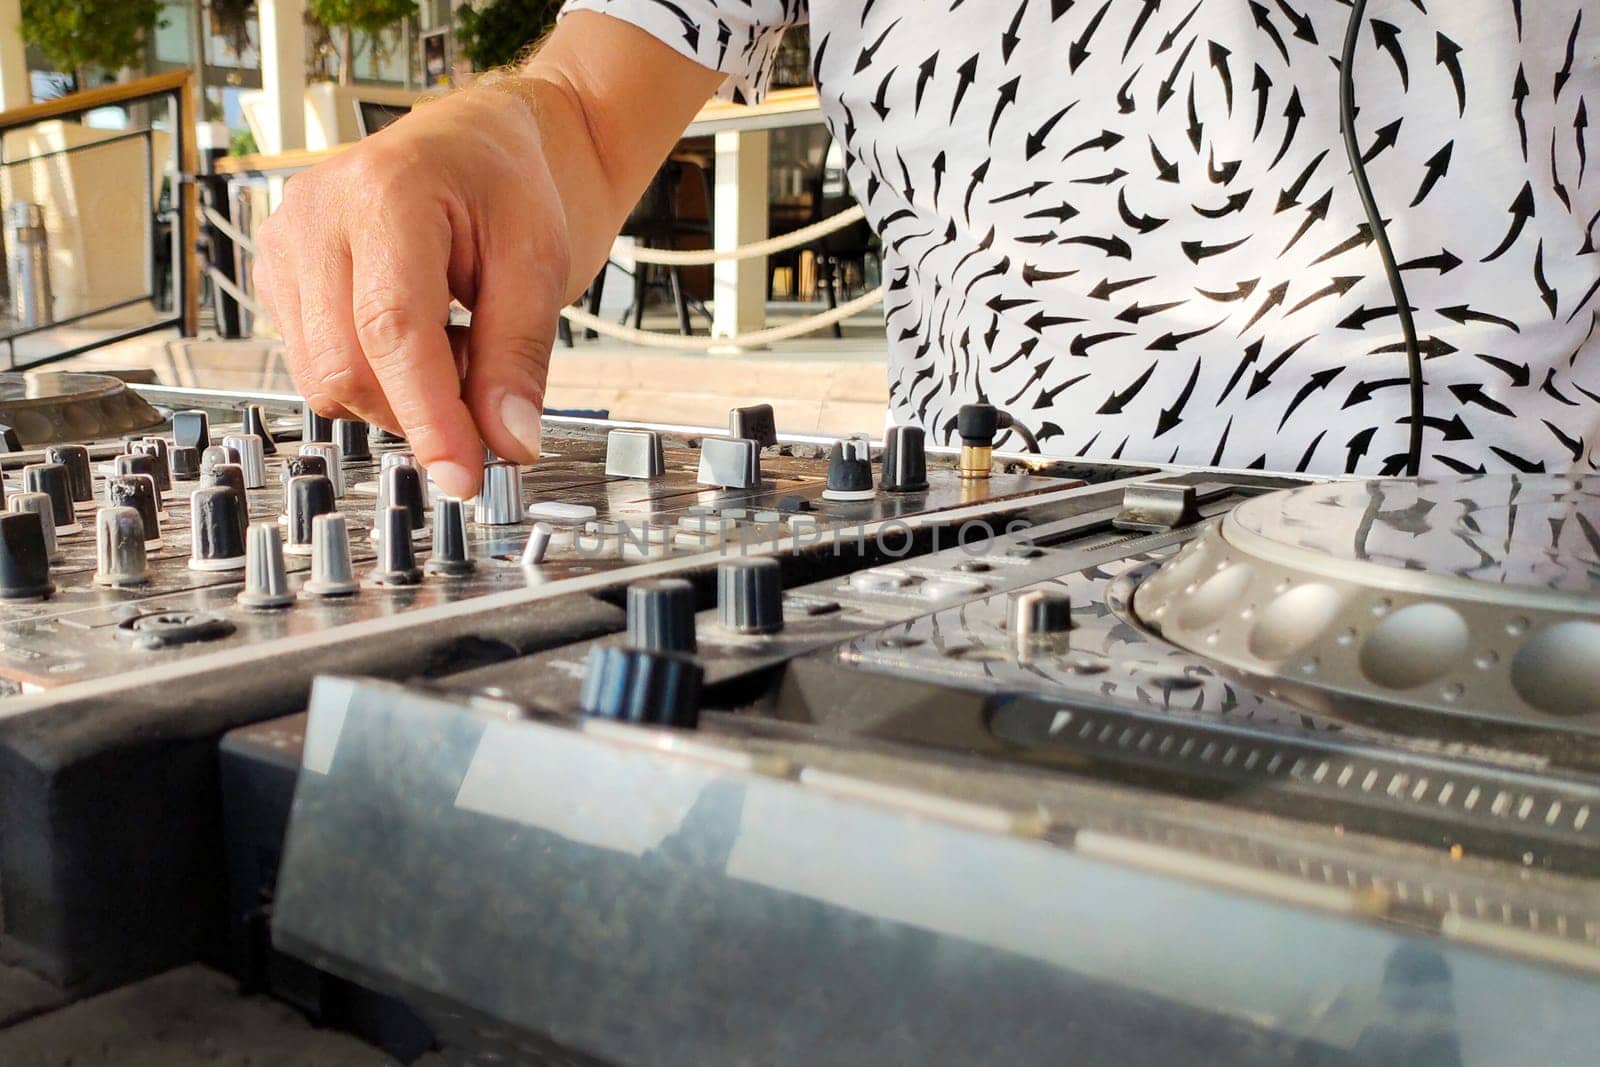 Turkey, Alanya - August 12, 2022: DJ creates music on mixing player, hands and mixer close-up